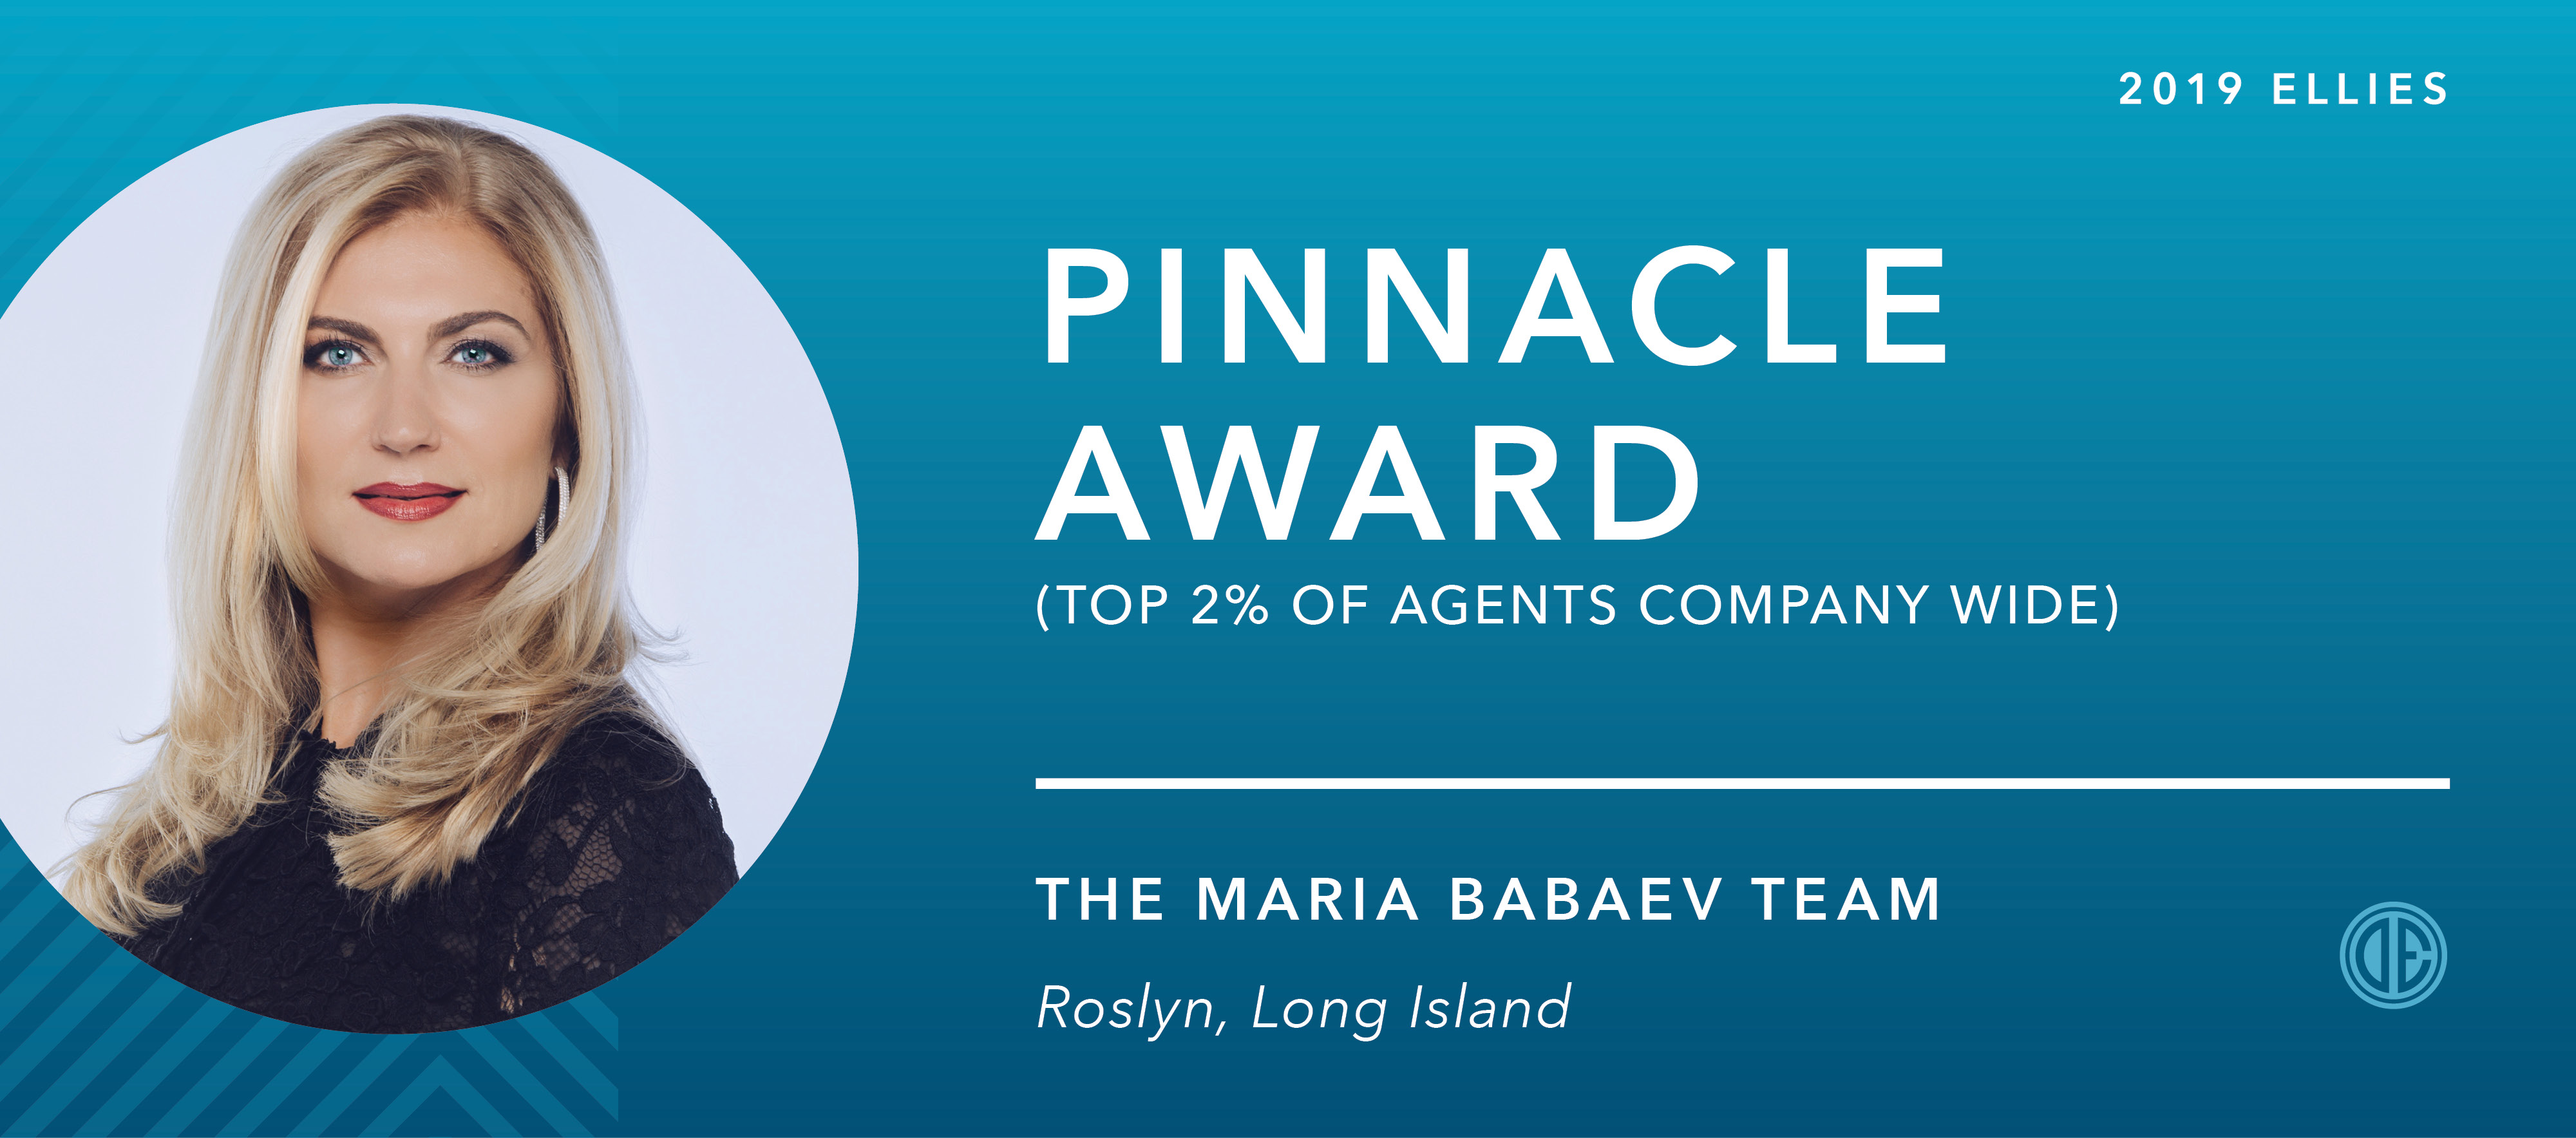 The Maria Babaev Team Takes Home Another Pinnacle Award – Top 2% Company Wide